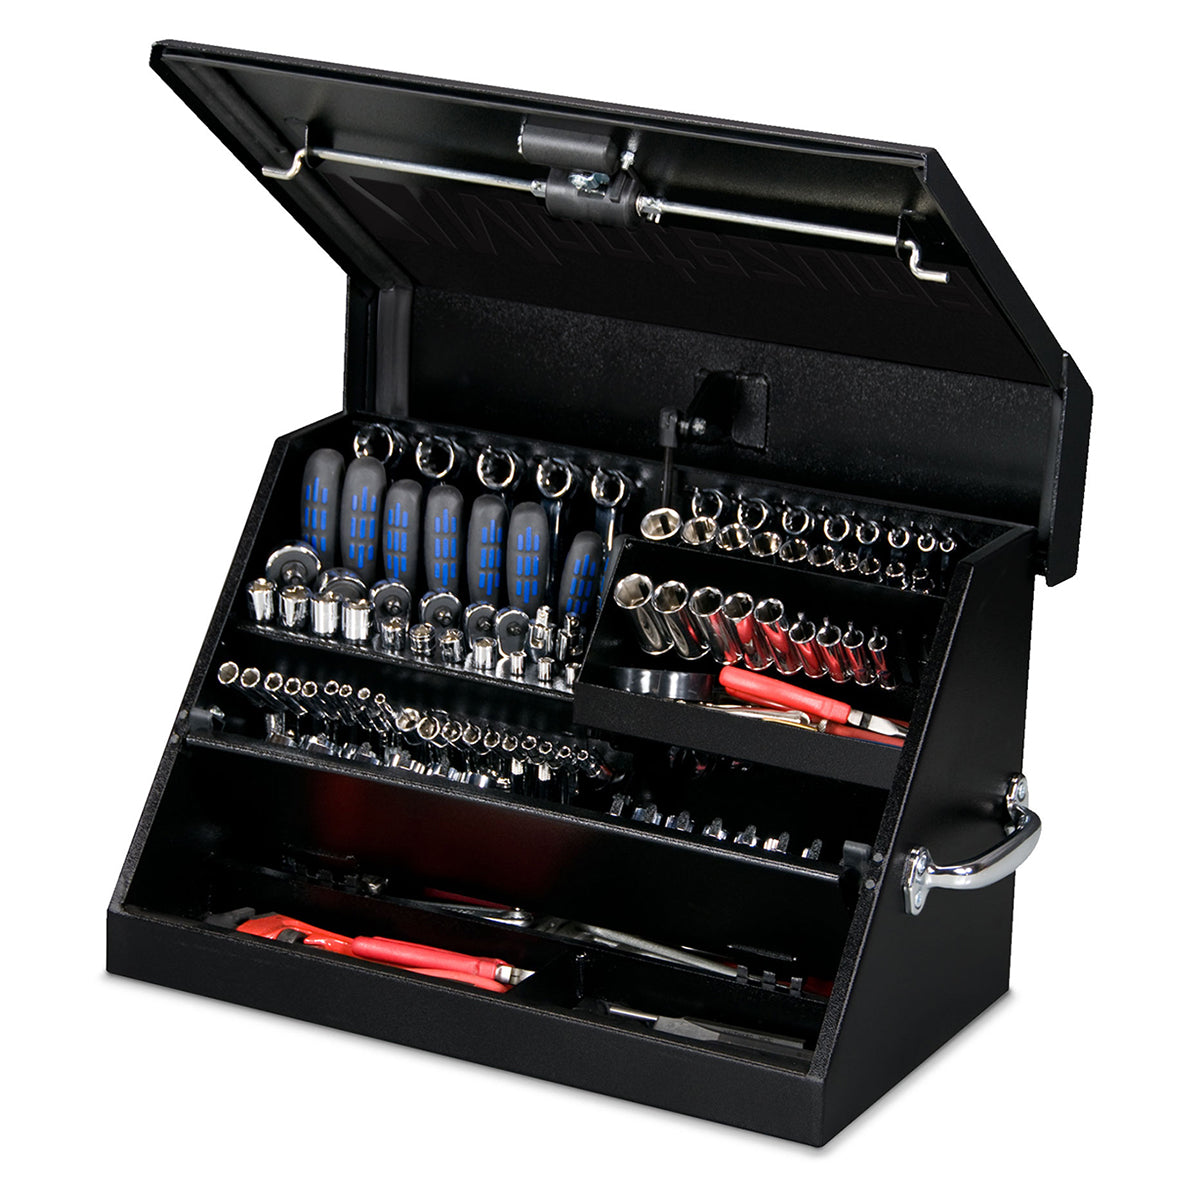 14-inch Tool Box with Tray and Organizers Includes 3 Small Parts